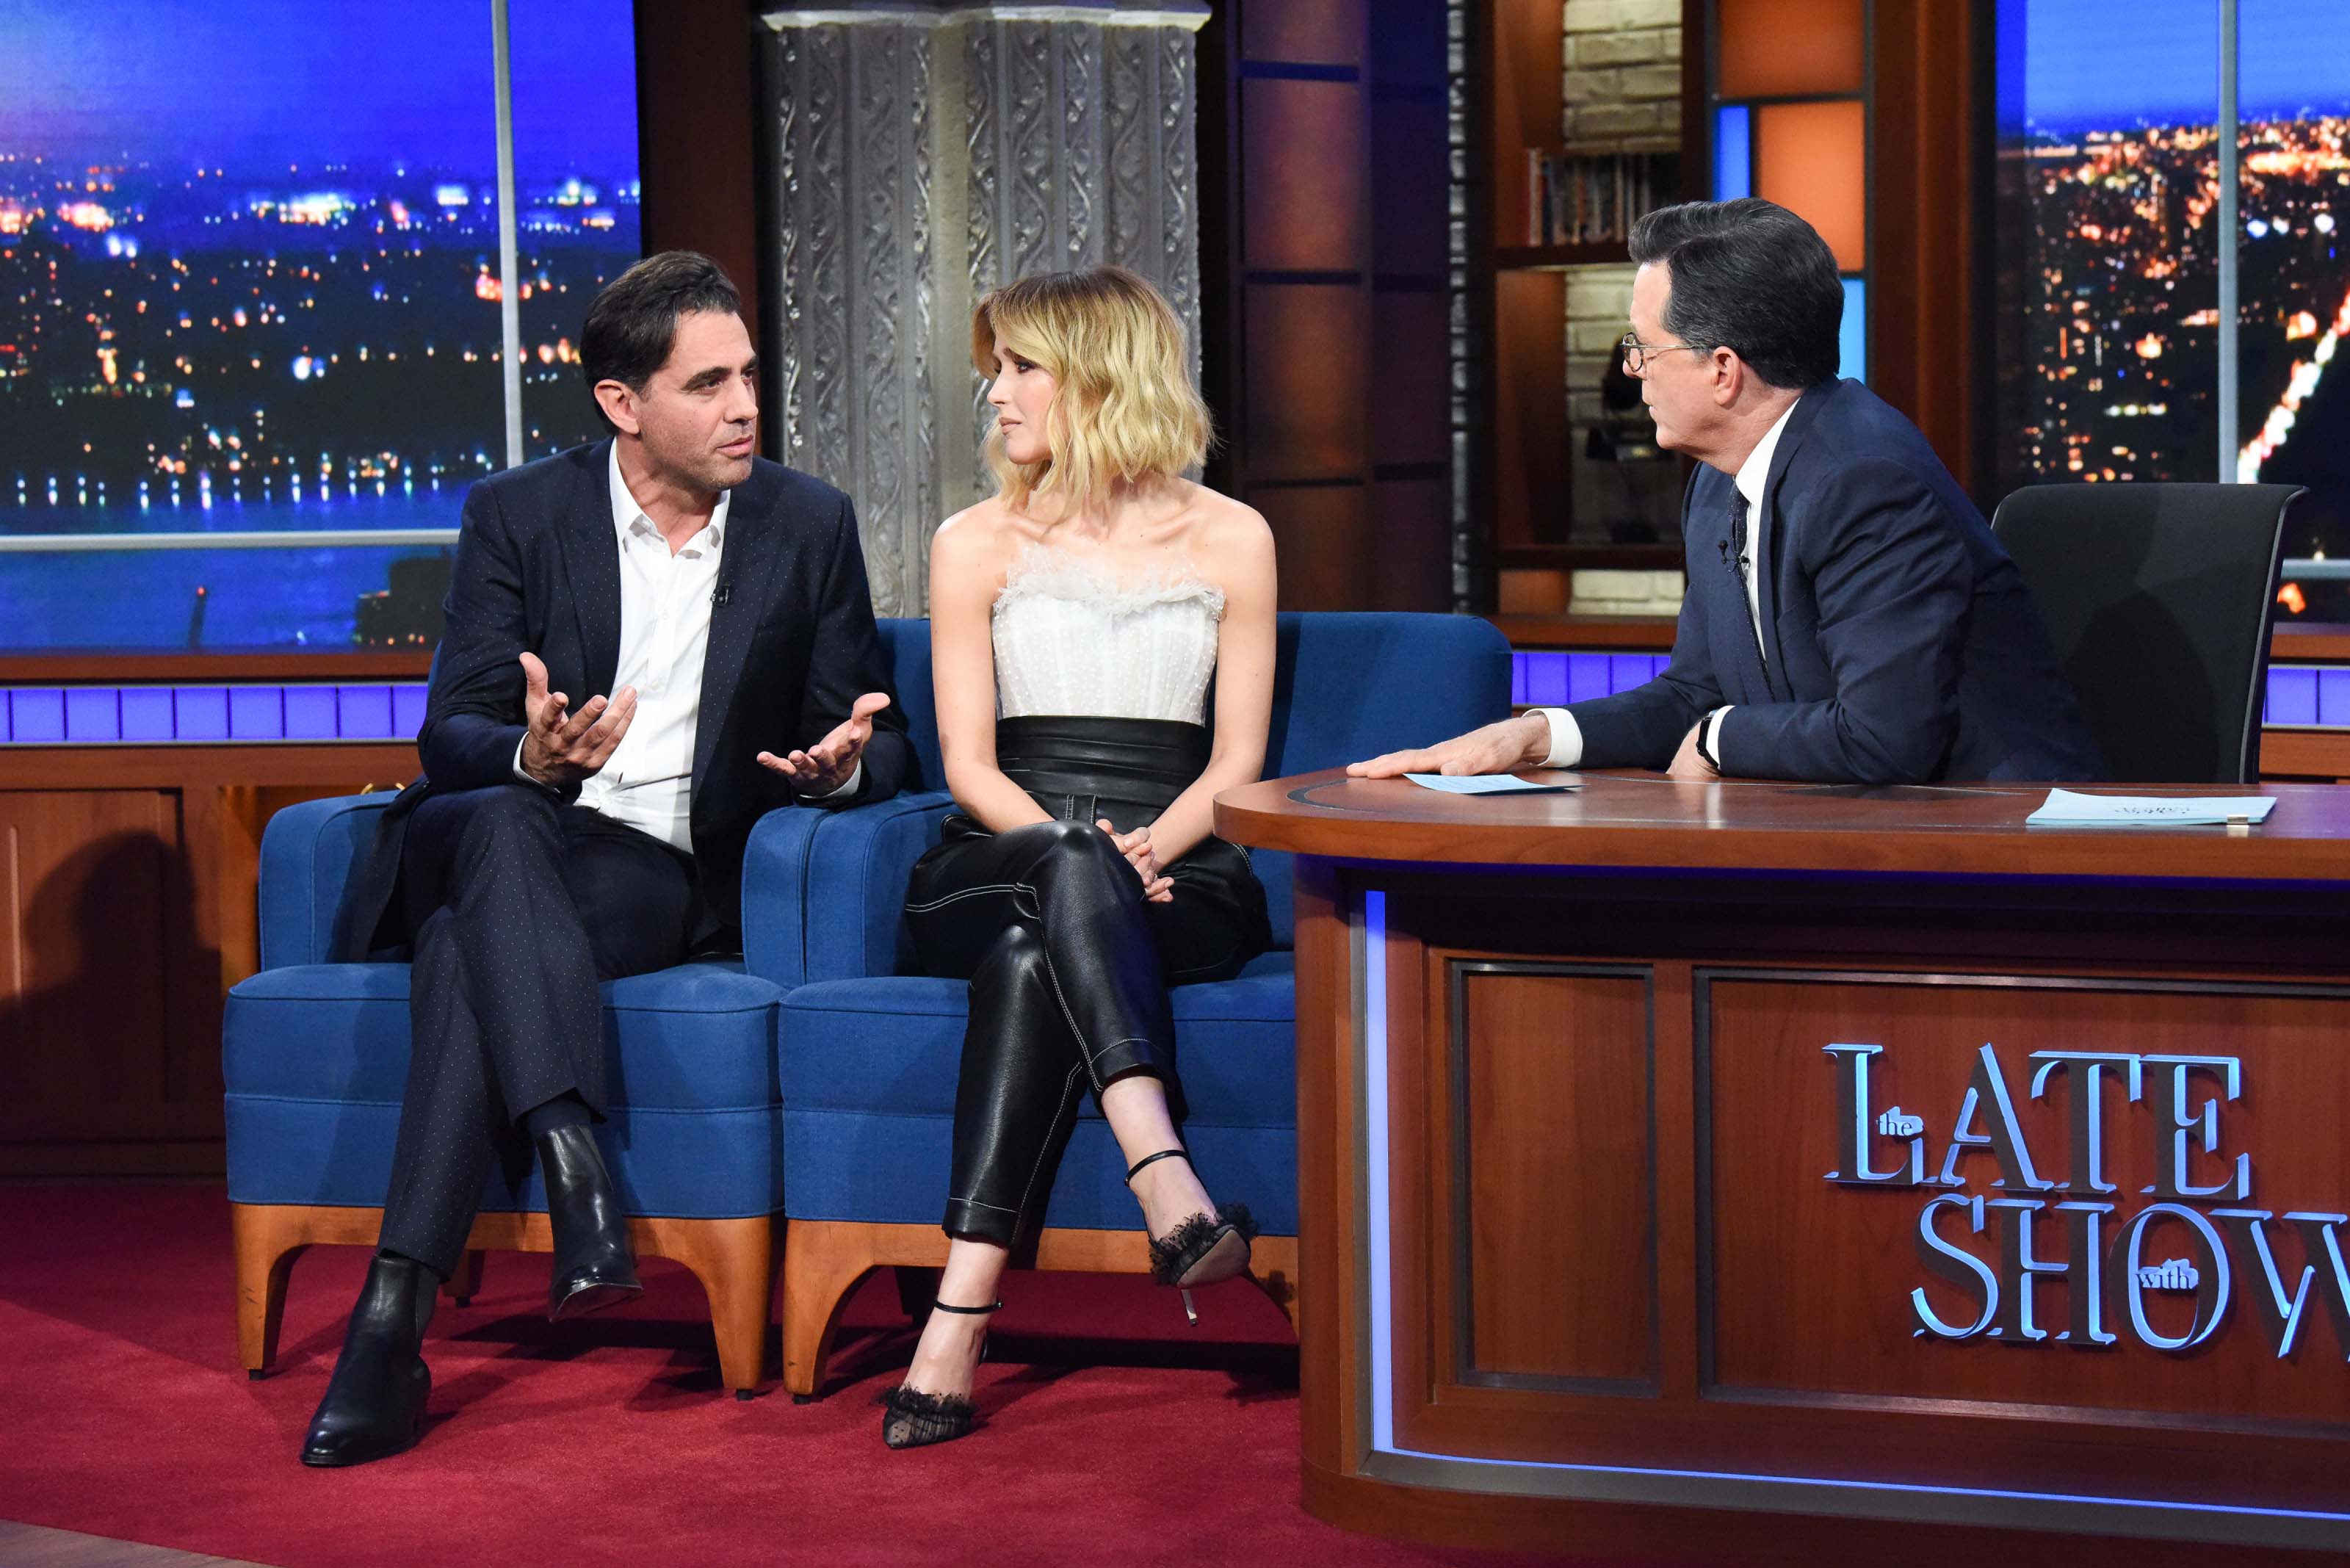 Rose Byrne attends The Late Show with Stephen Colbert